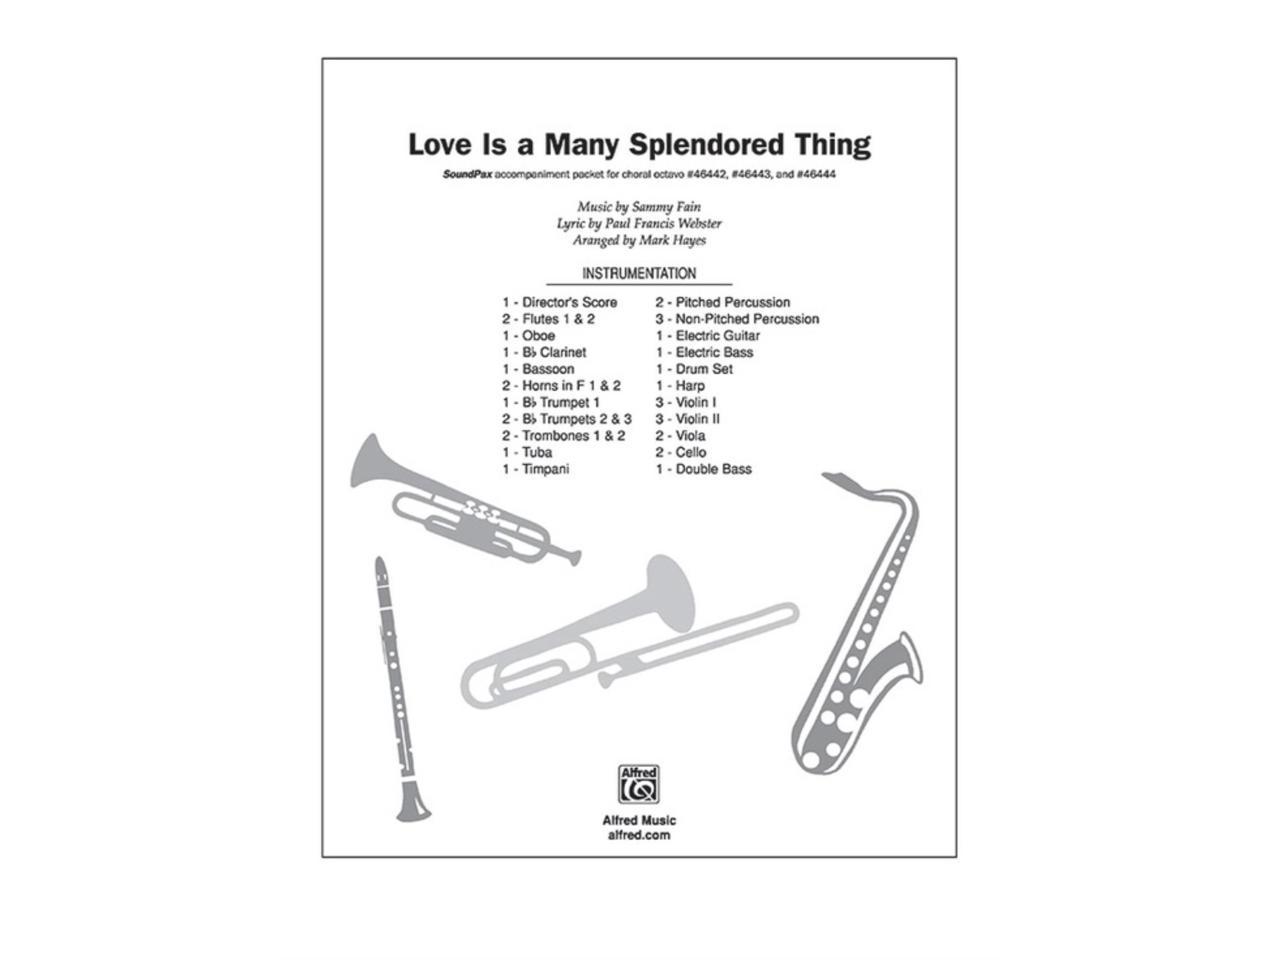 Love Is A Many Splendored Thing Music By Sammy Fain Lyric By Paul Francis Webster Arr Mark Hayes Newegg Com